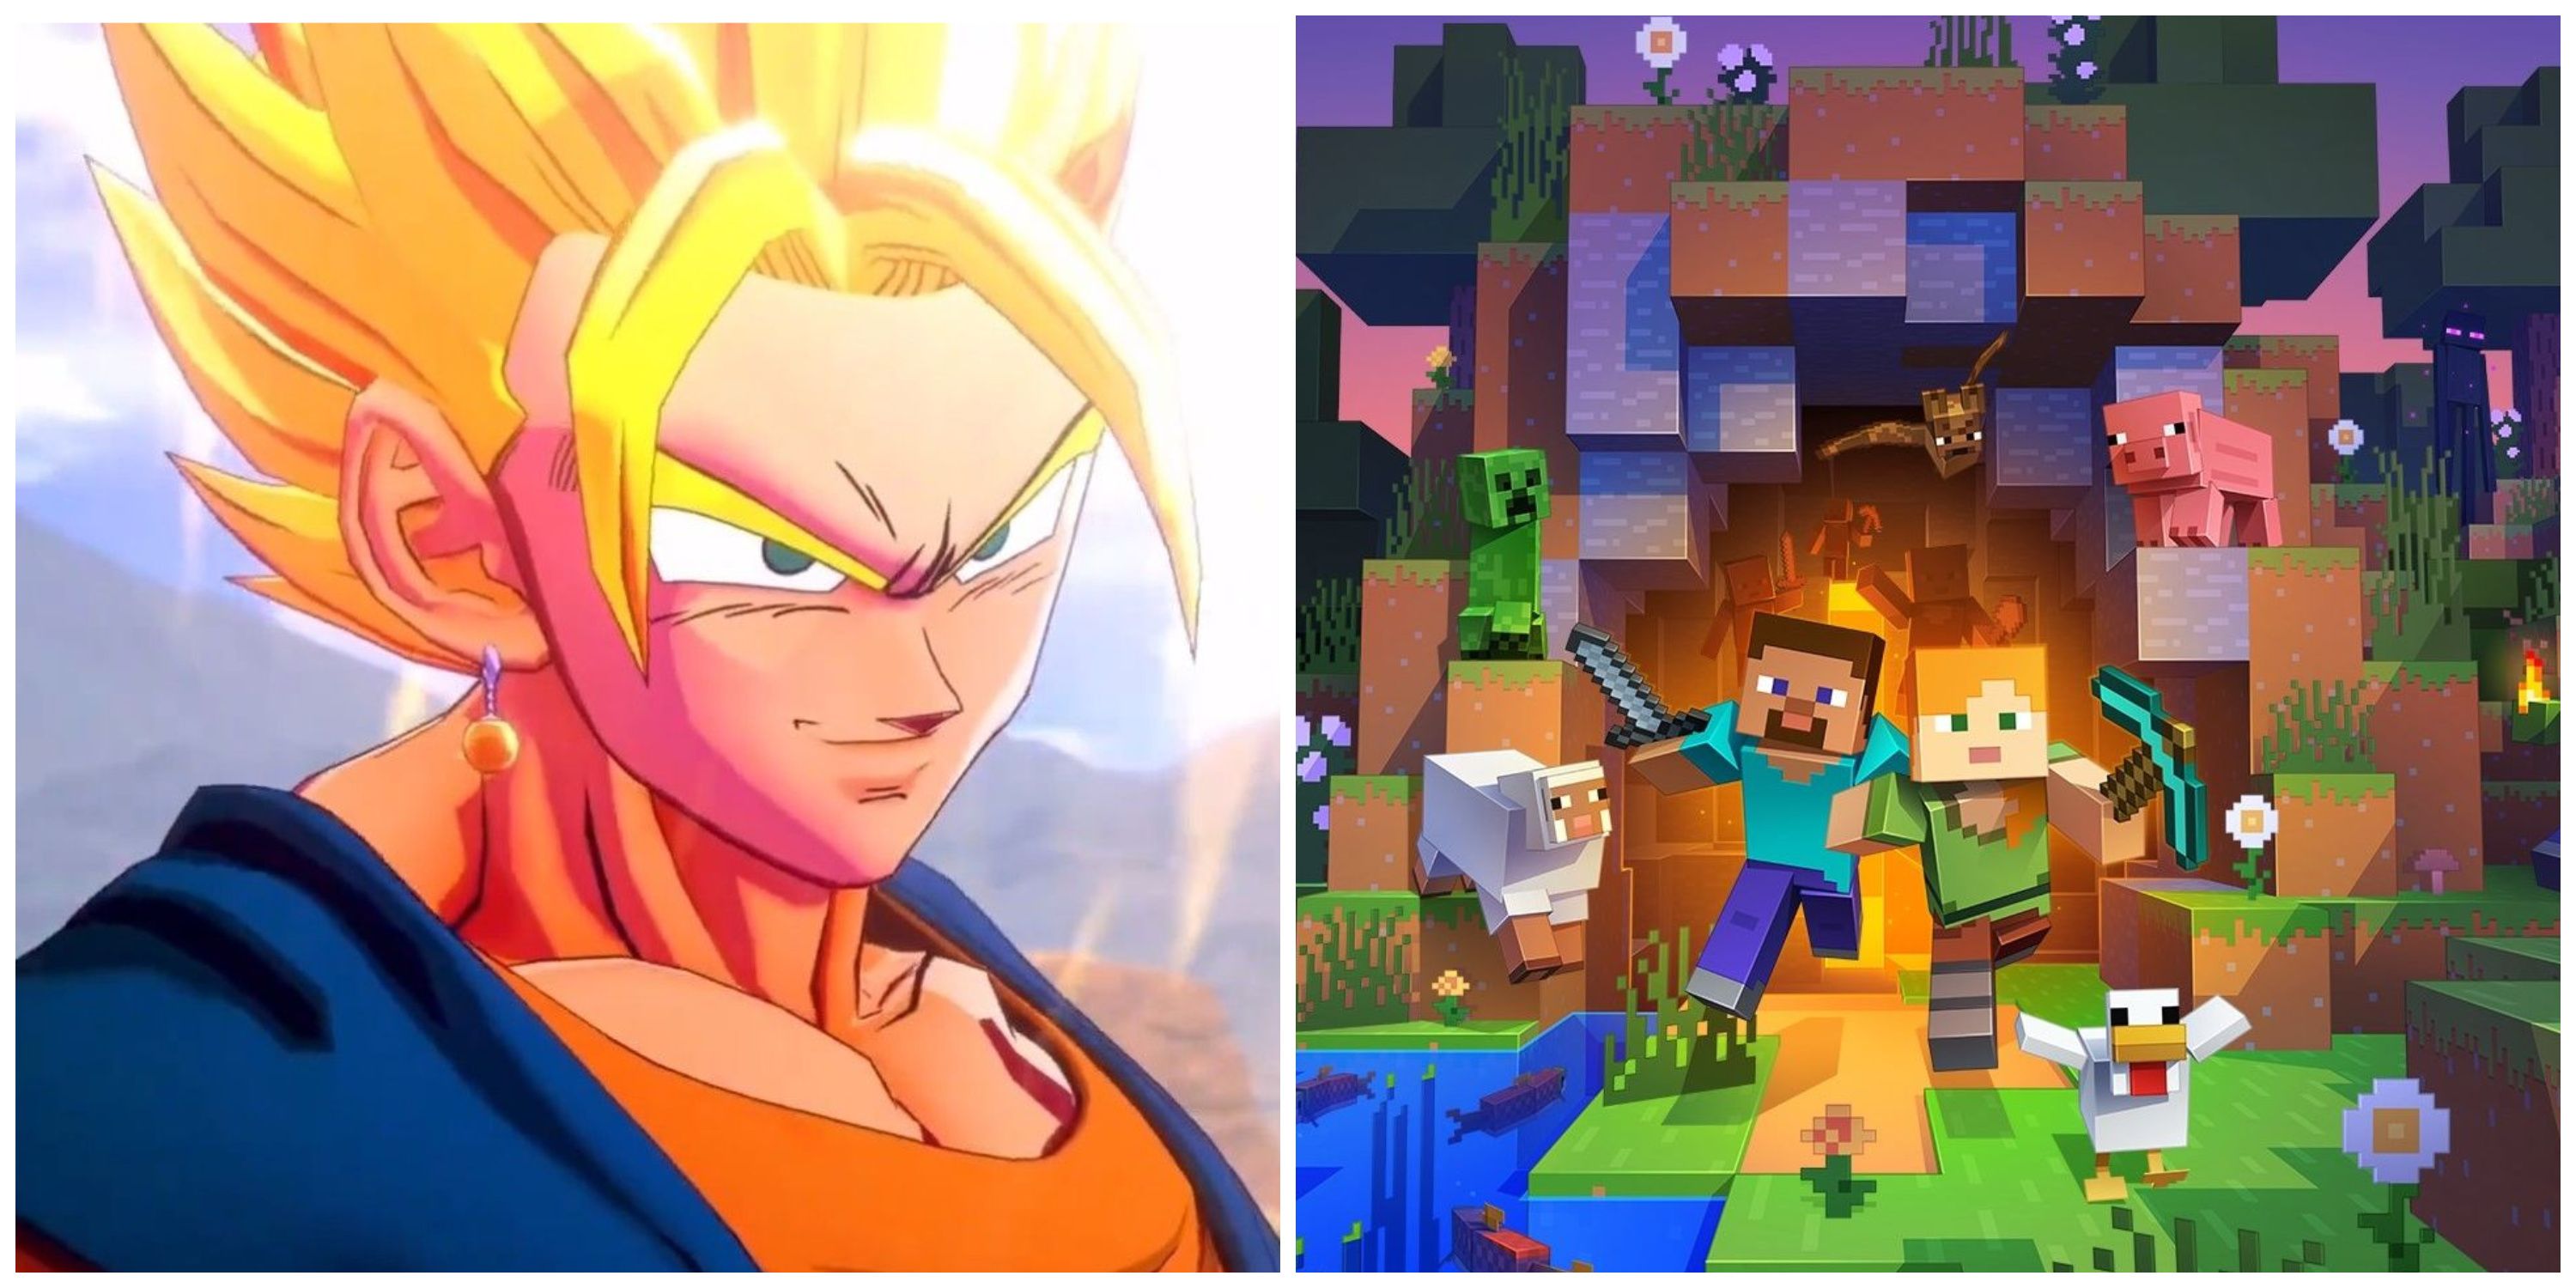 goku in video games, alex and steve from minecraft